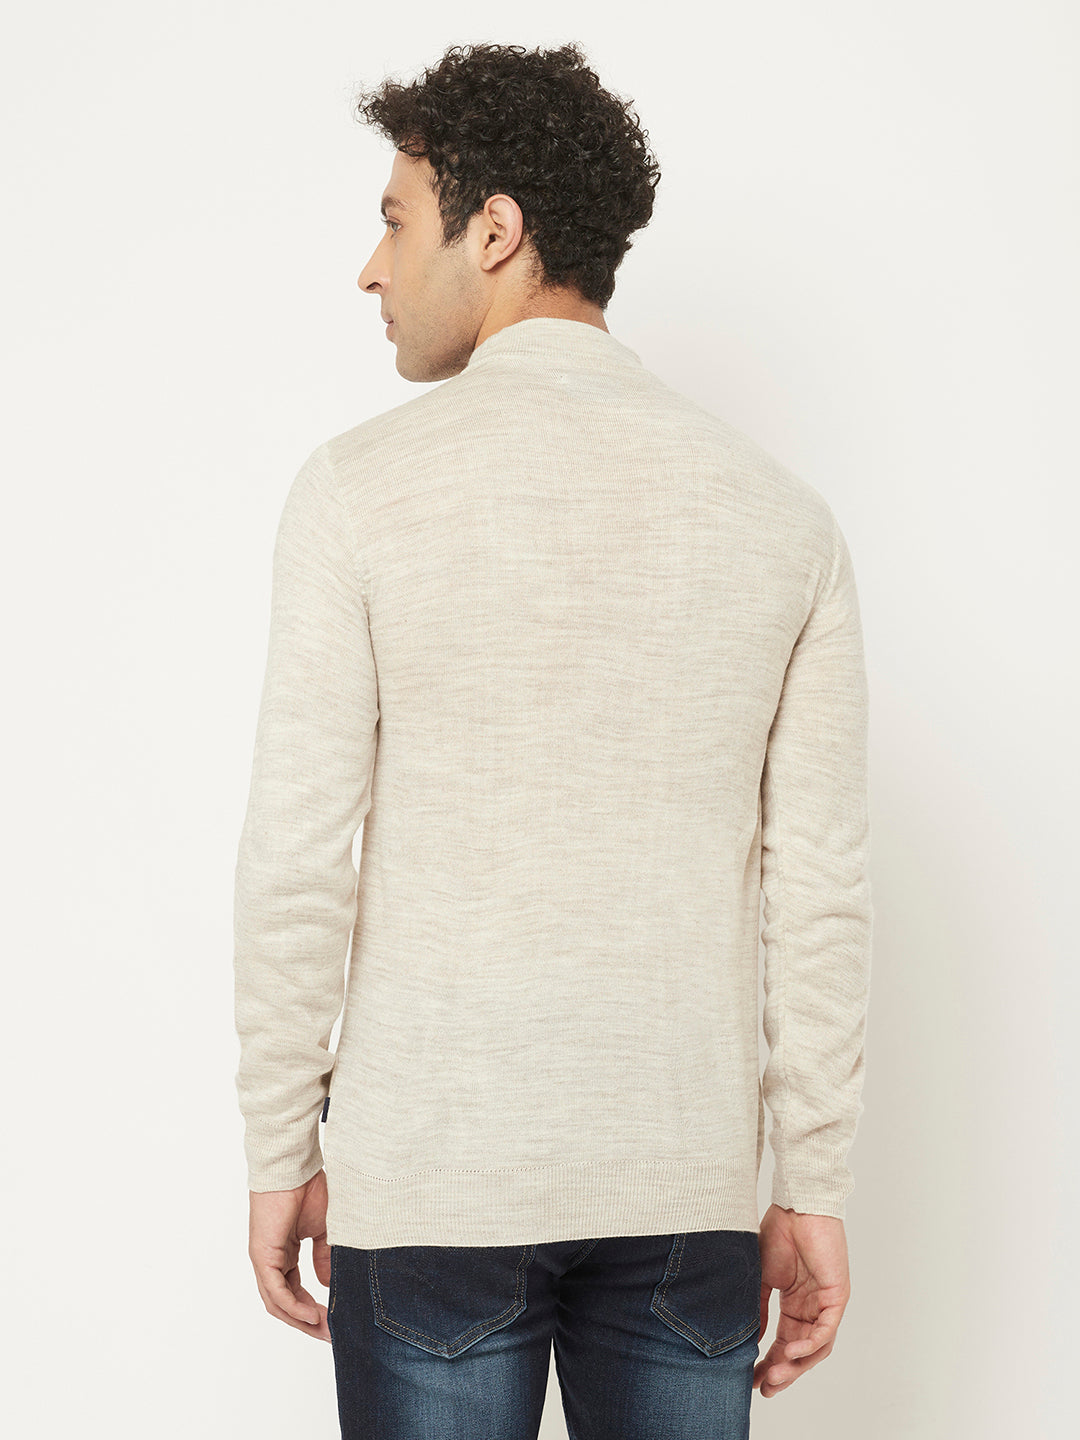 Off White Sweater with Melange Texture-Men Sweaters-Crimsoune Club